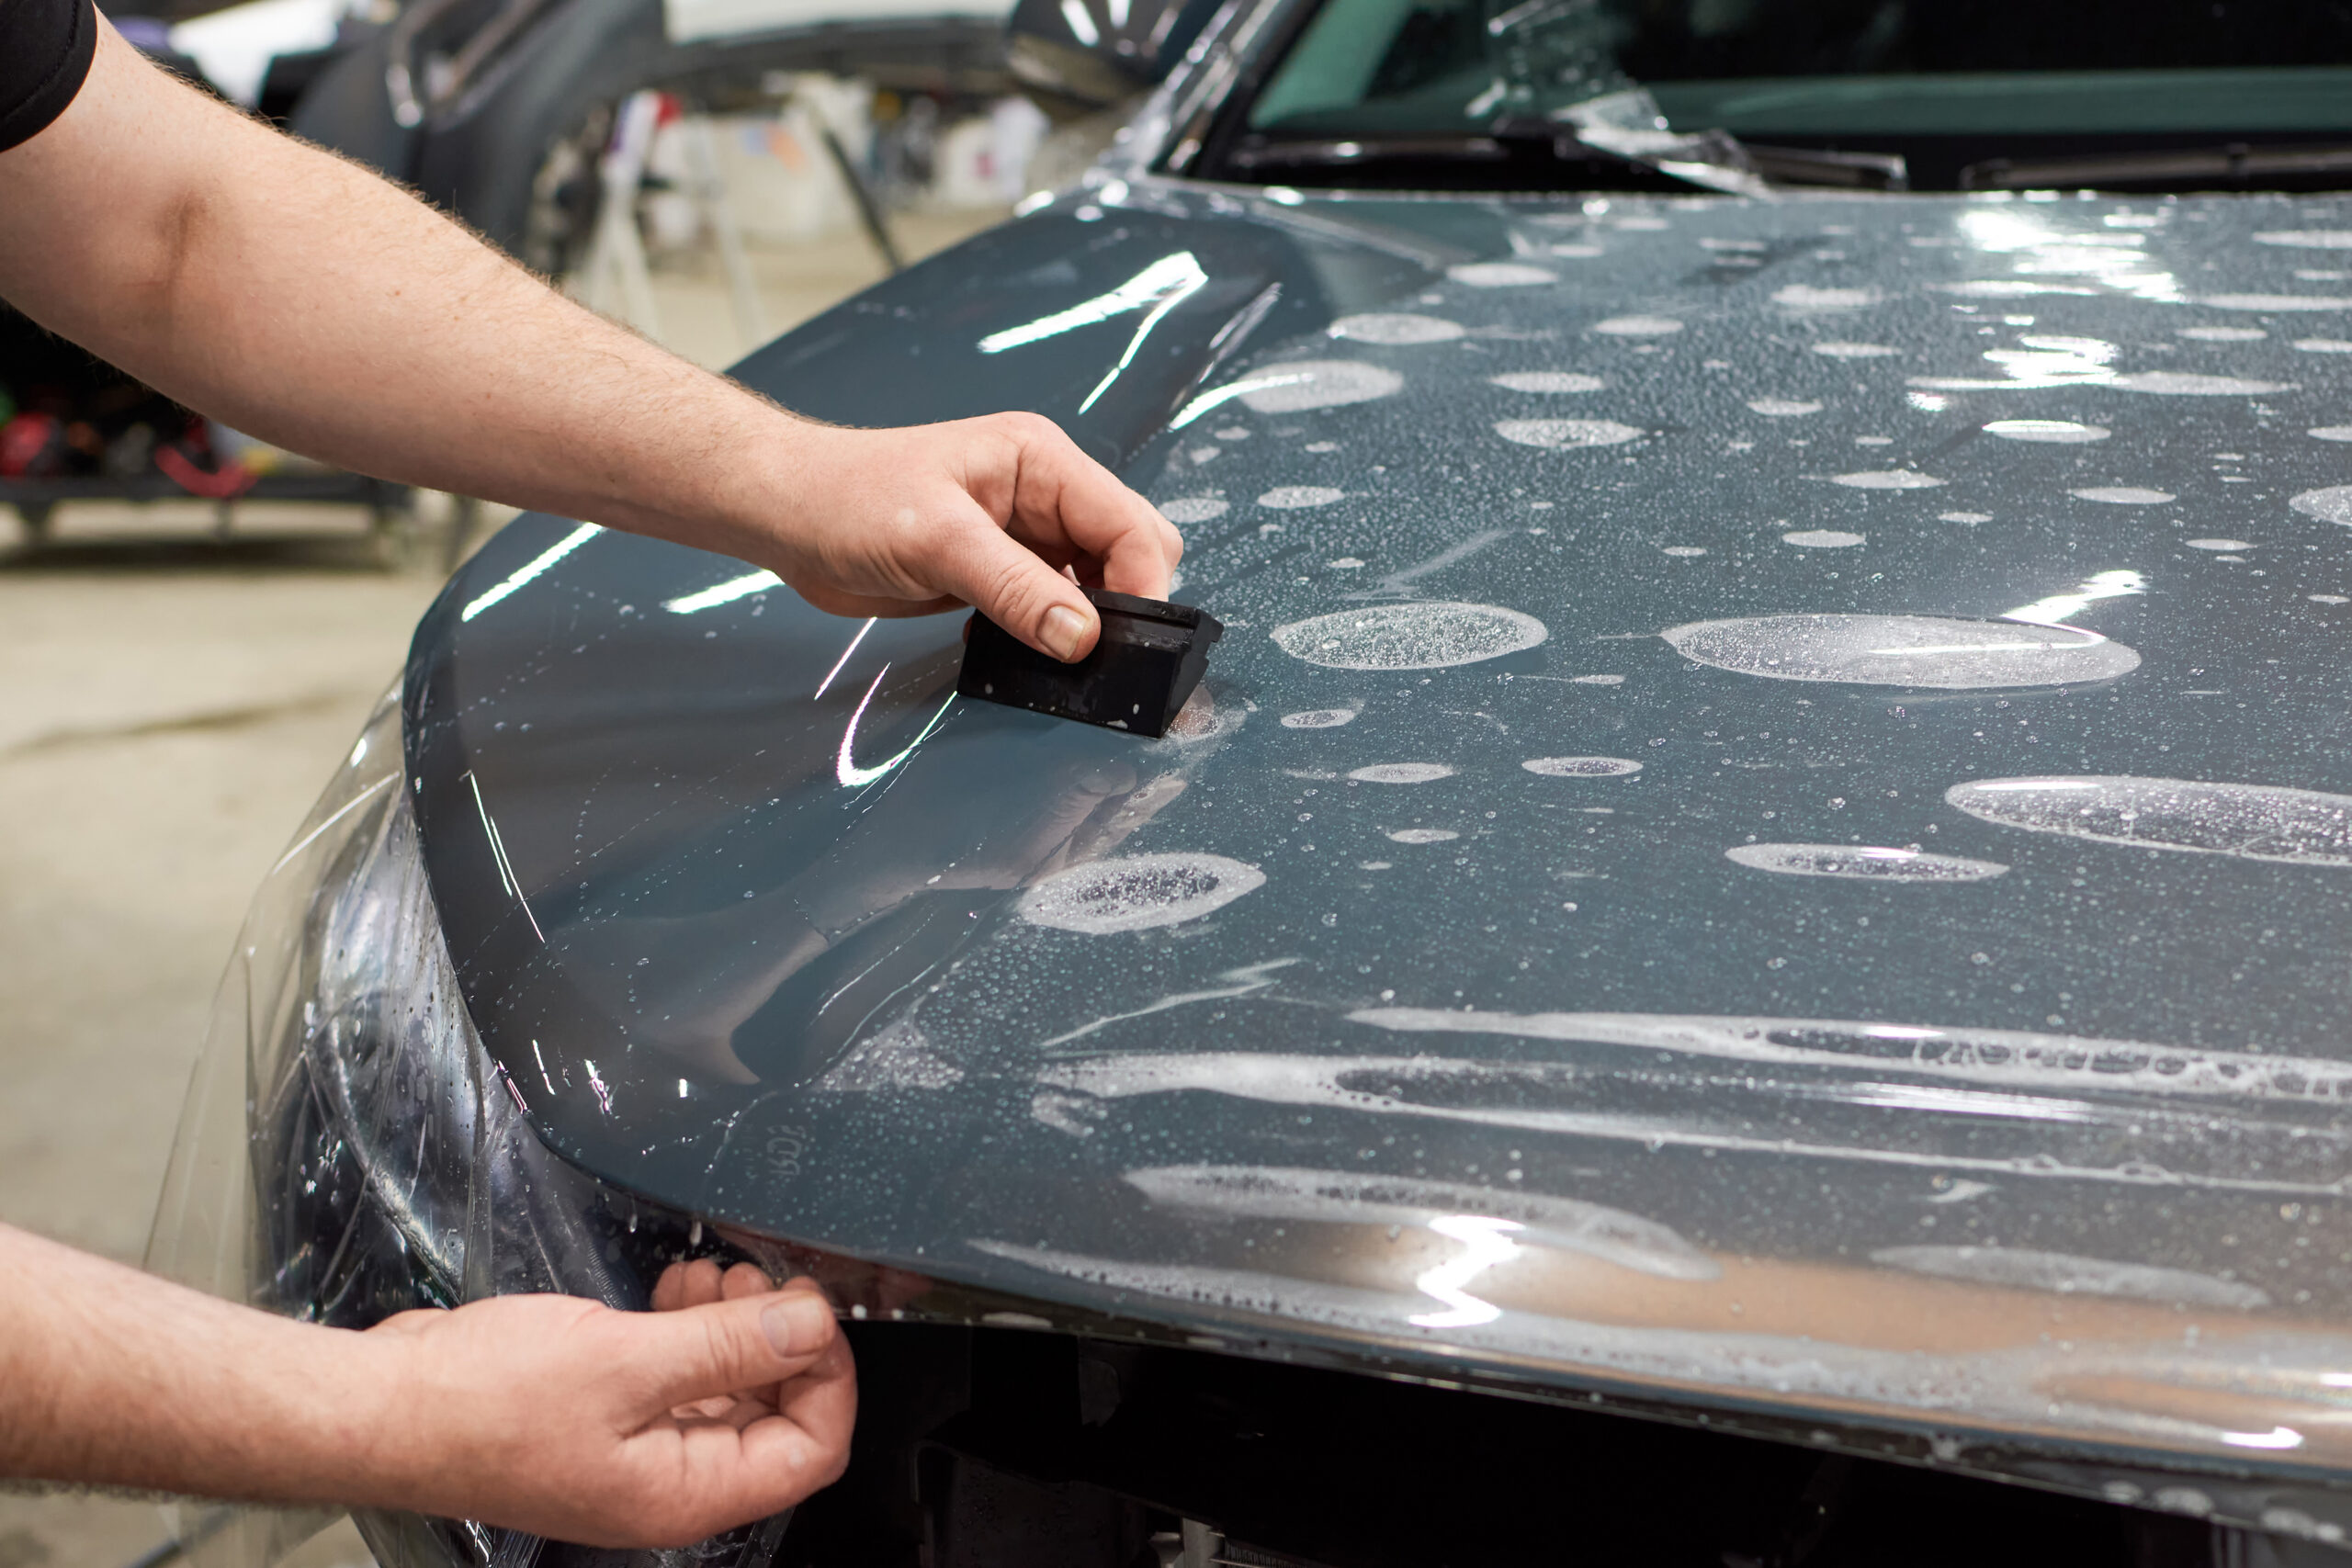 nstallation of a protective paint and varnish transparent film on the car. PPF polyurethane film to protect the car paint from stones and scratches.